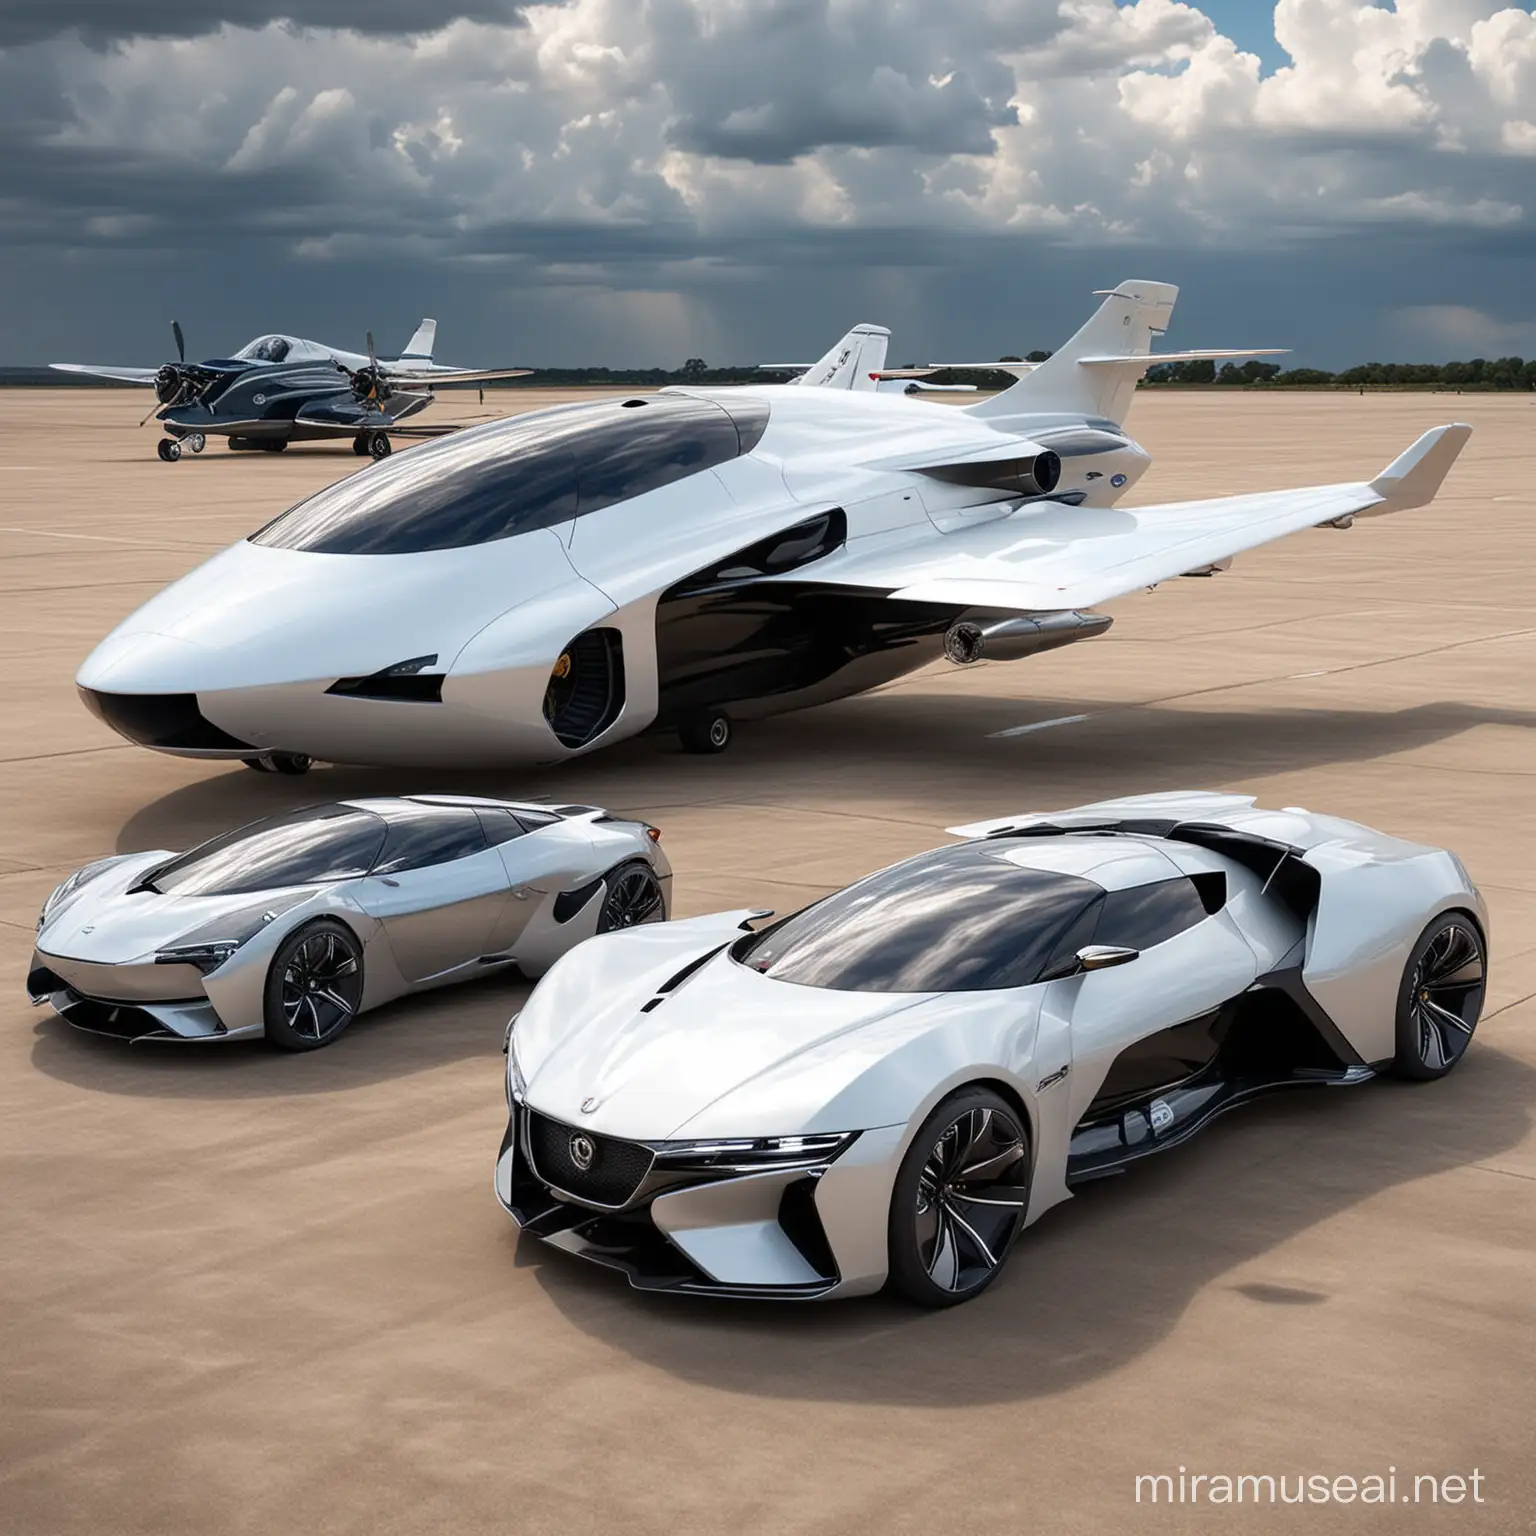 Innovative Future Vehicles Advanced Cars Motorcycles and Personal Planes